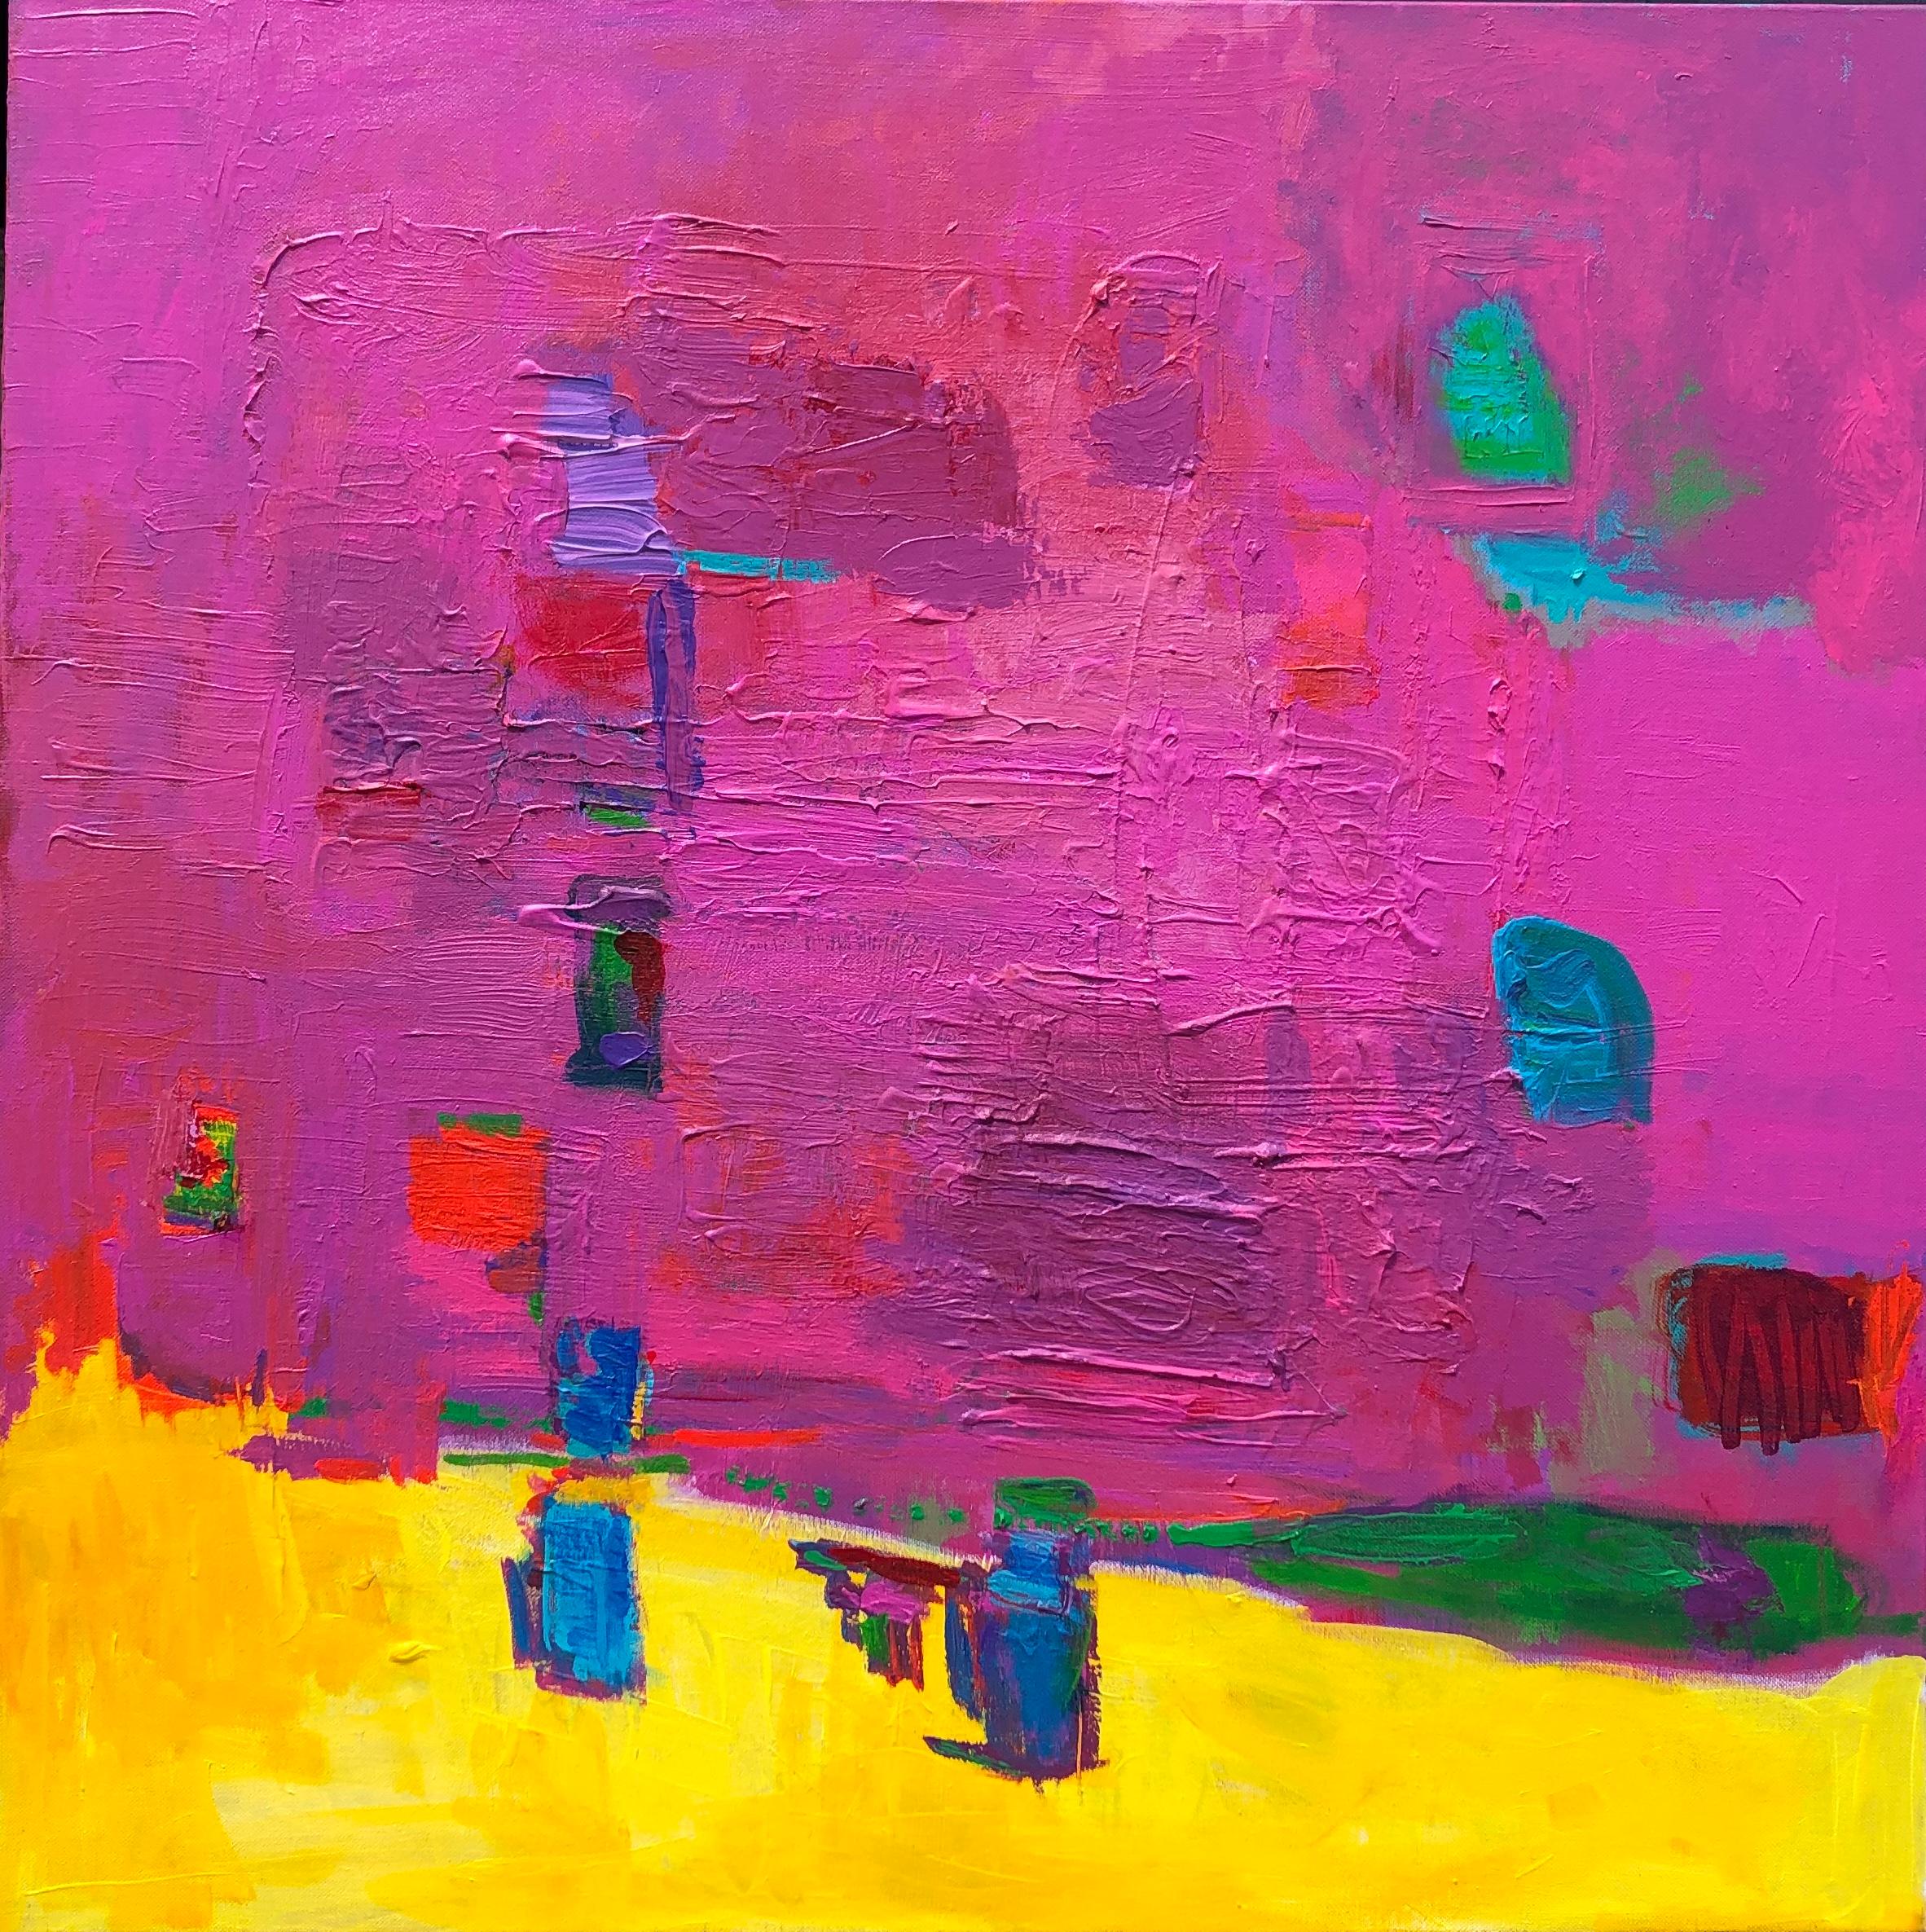 John Blee Abstract Painting - "Orchard Chance"  Bright pink color abstract painting w/ painterly brushstrokes